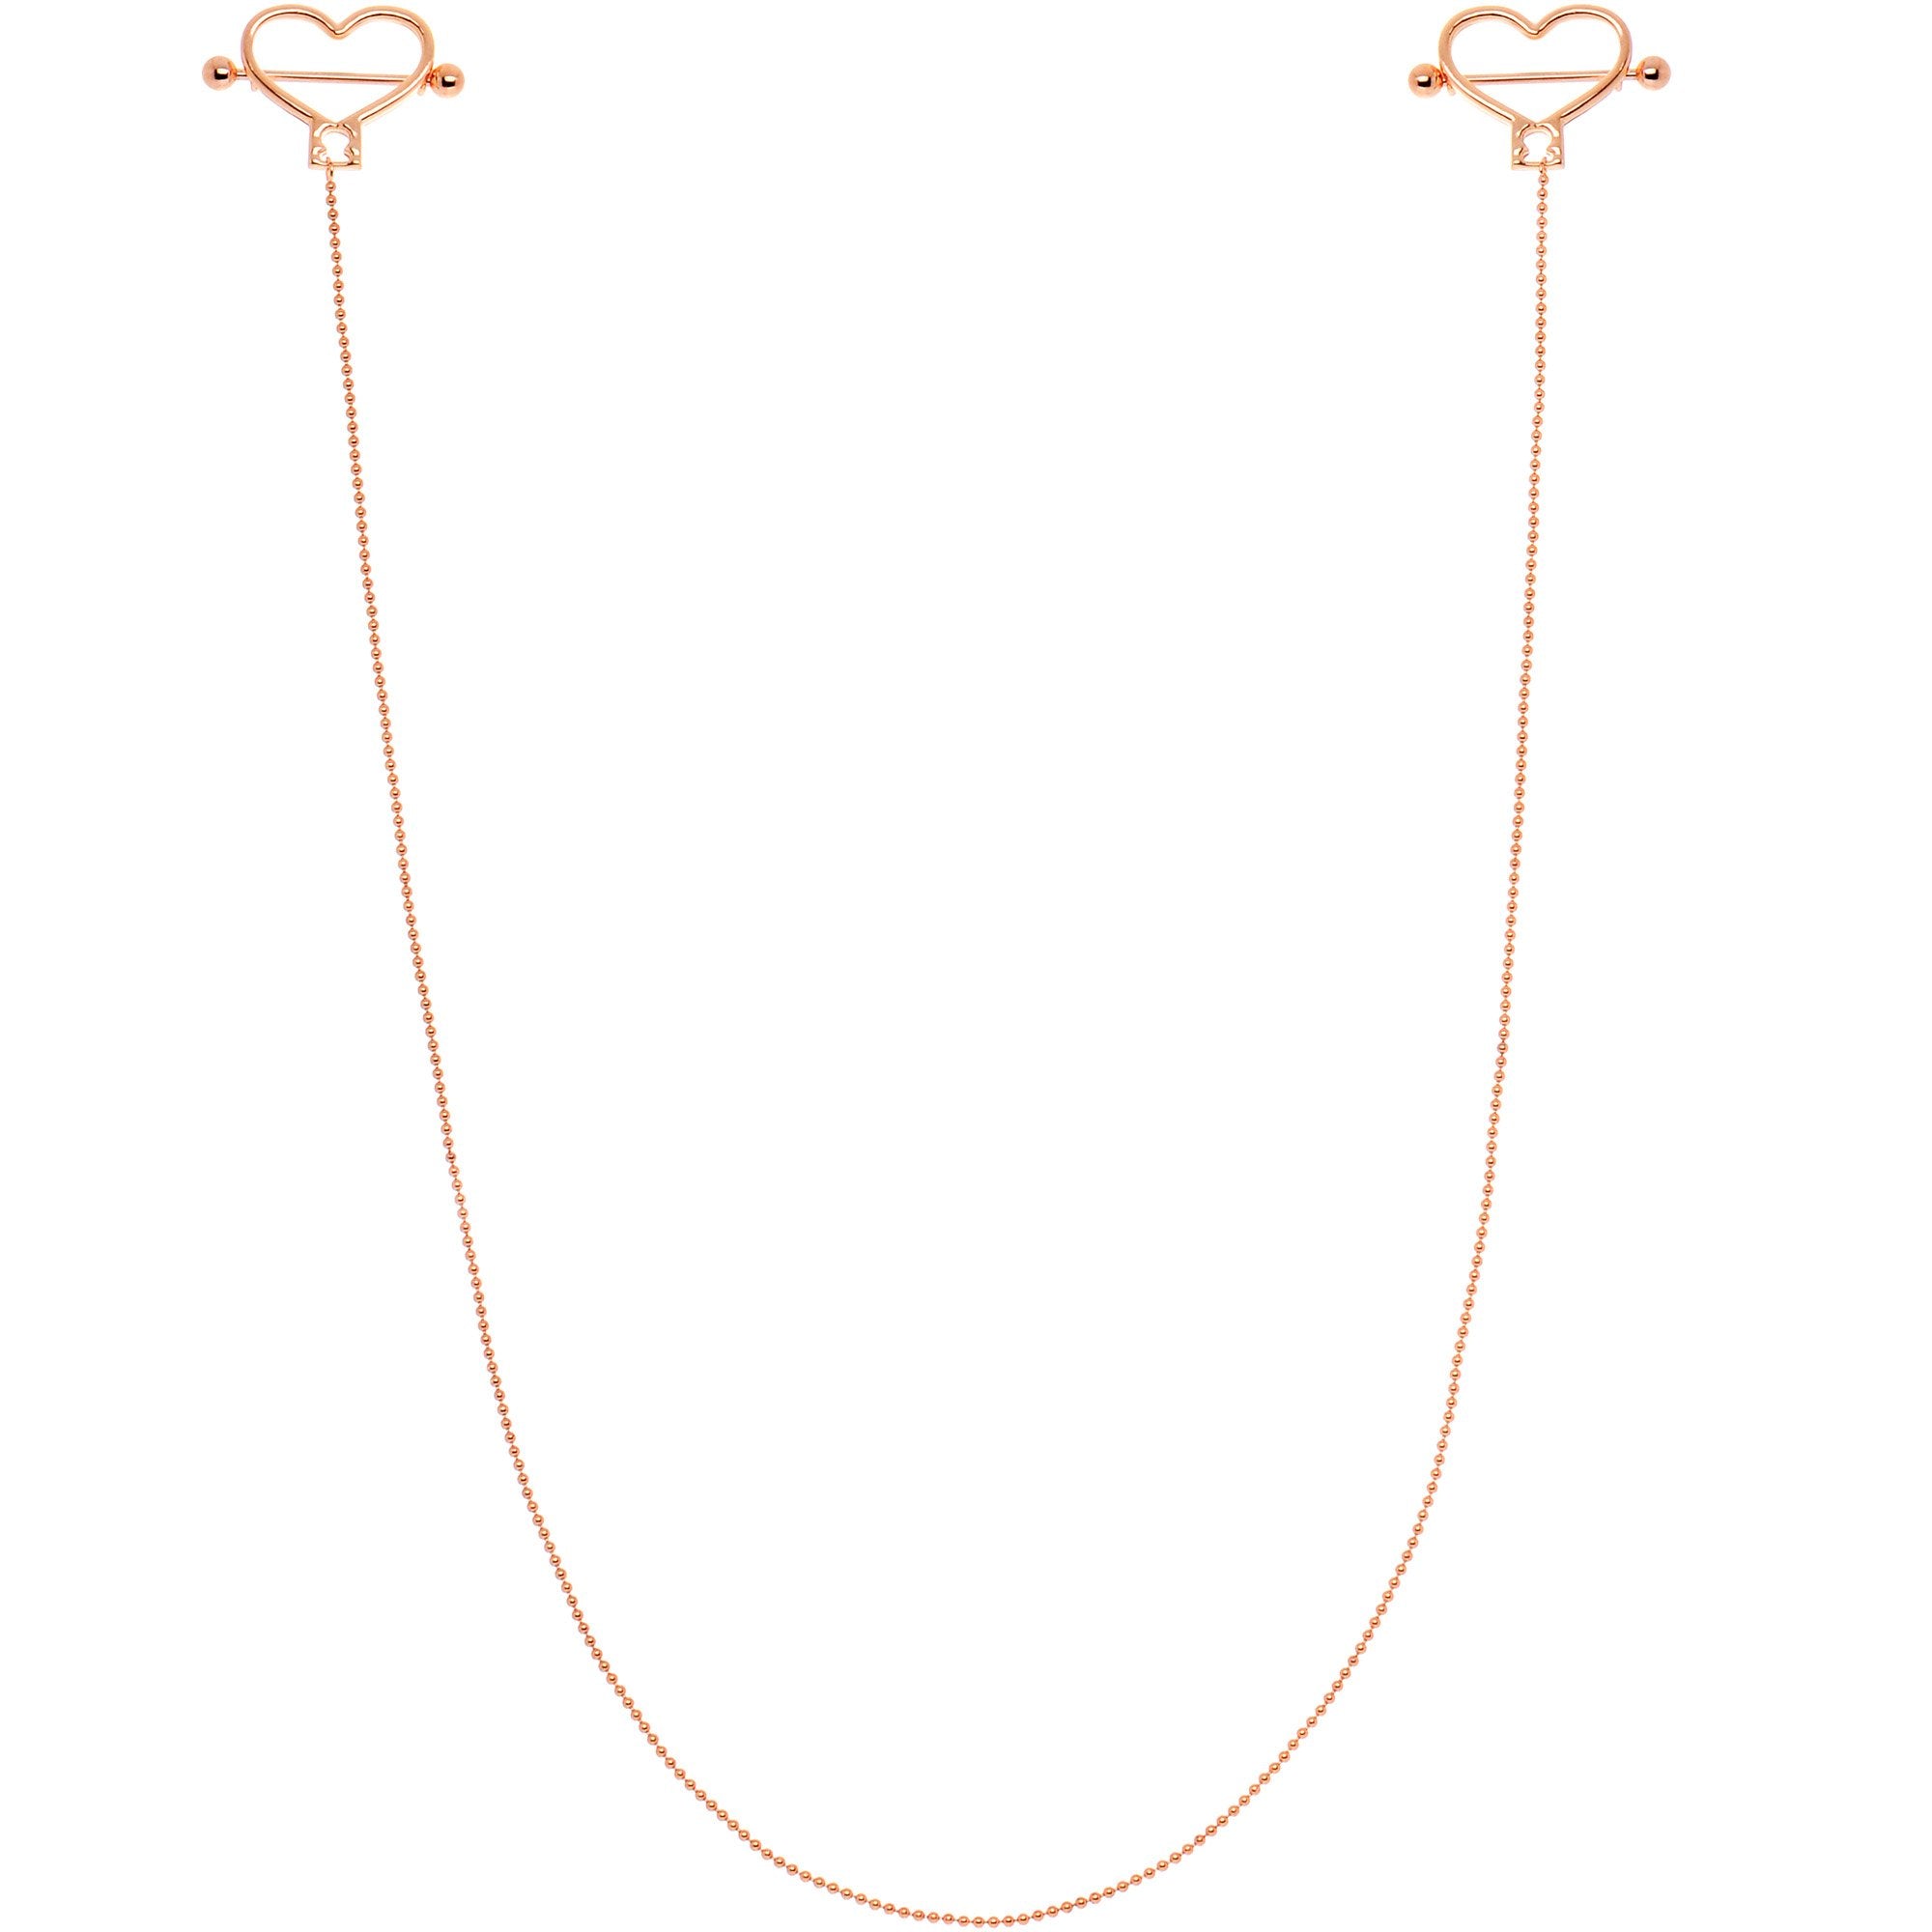 Rose Gold Tone Anodized Heart to Heart Dangle Nipple Chain